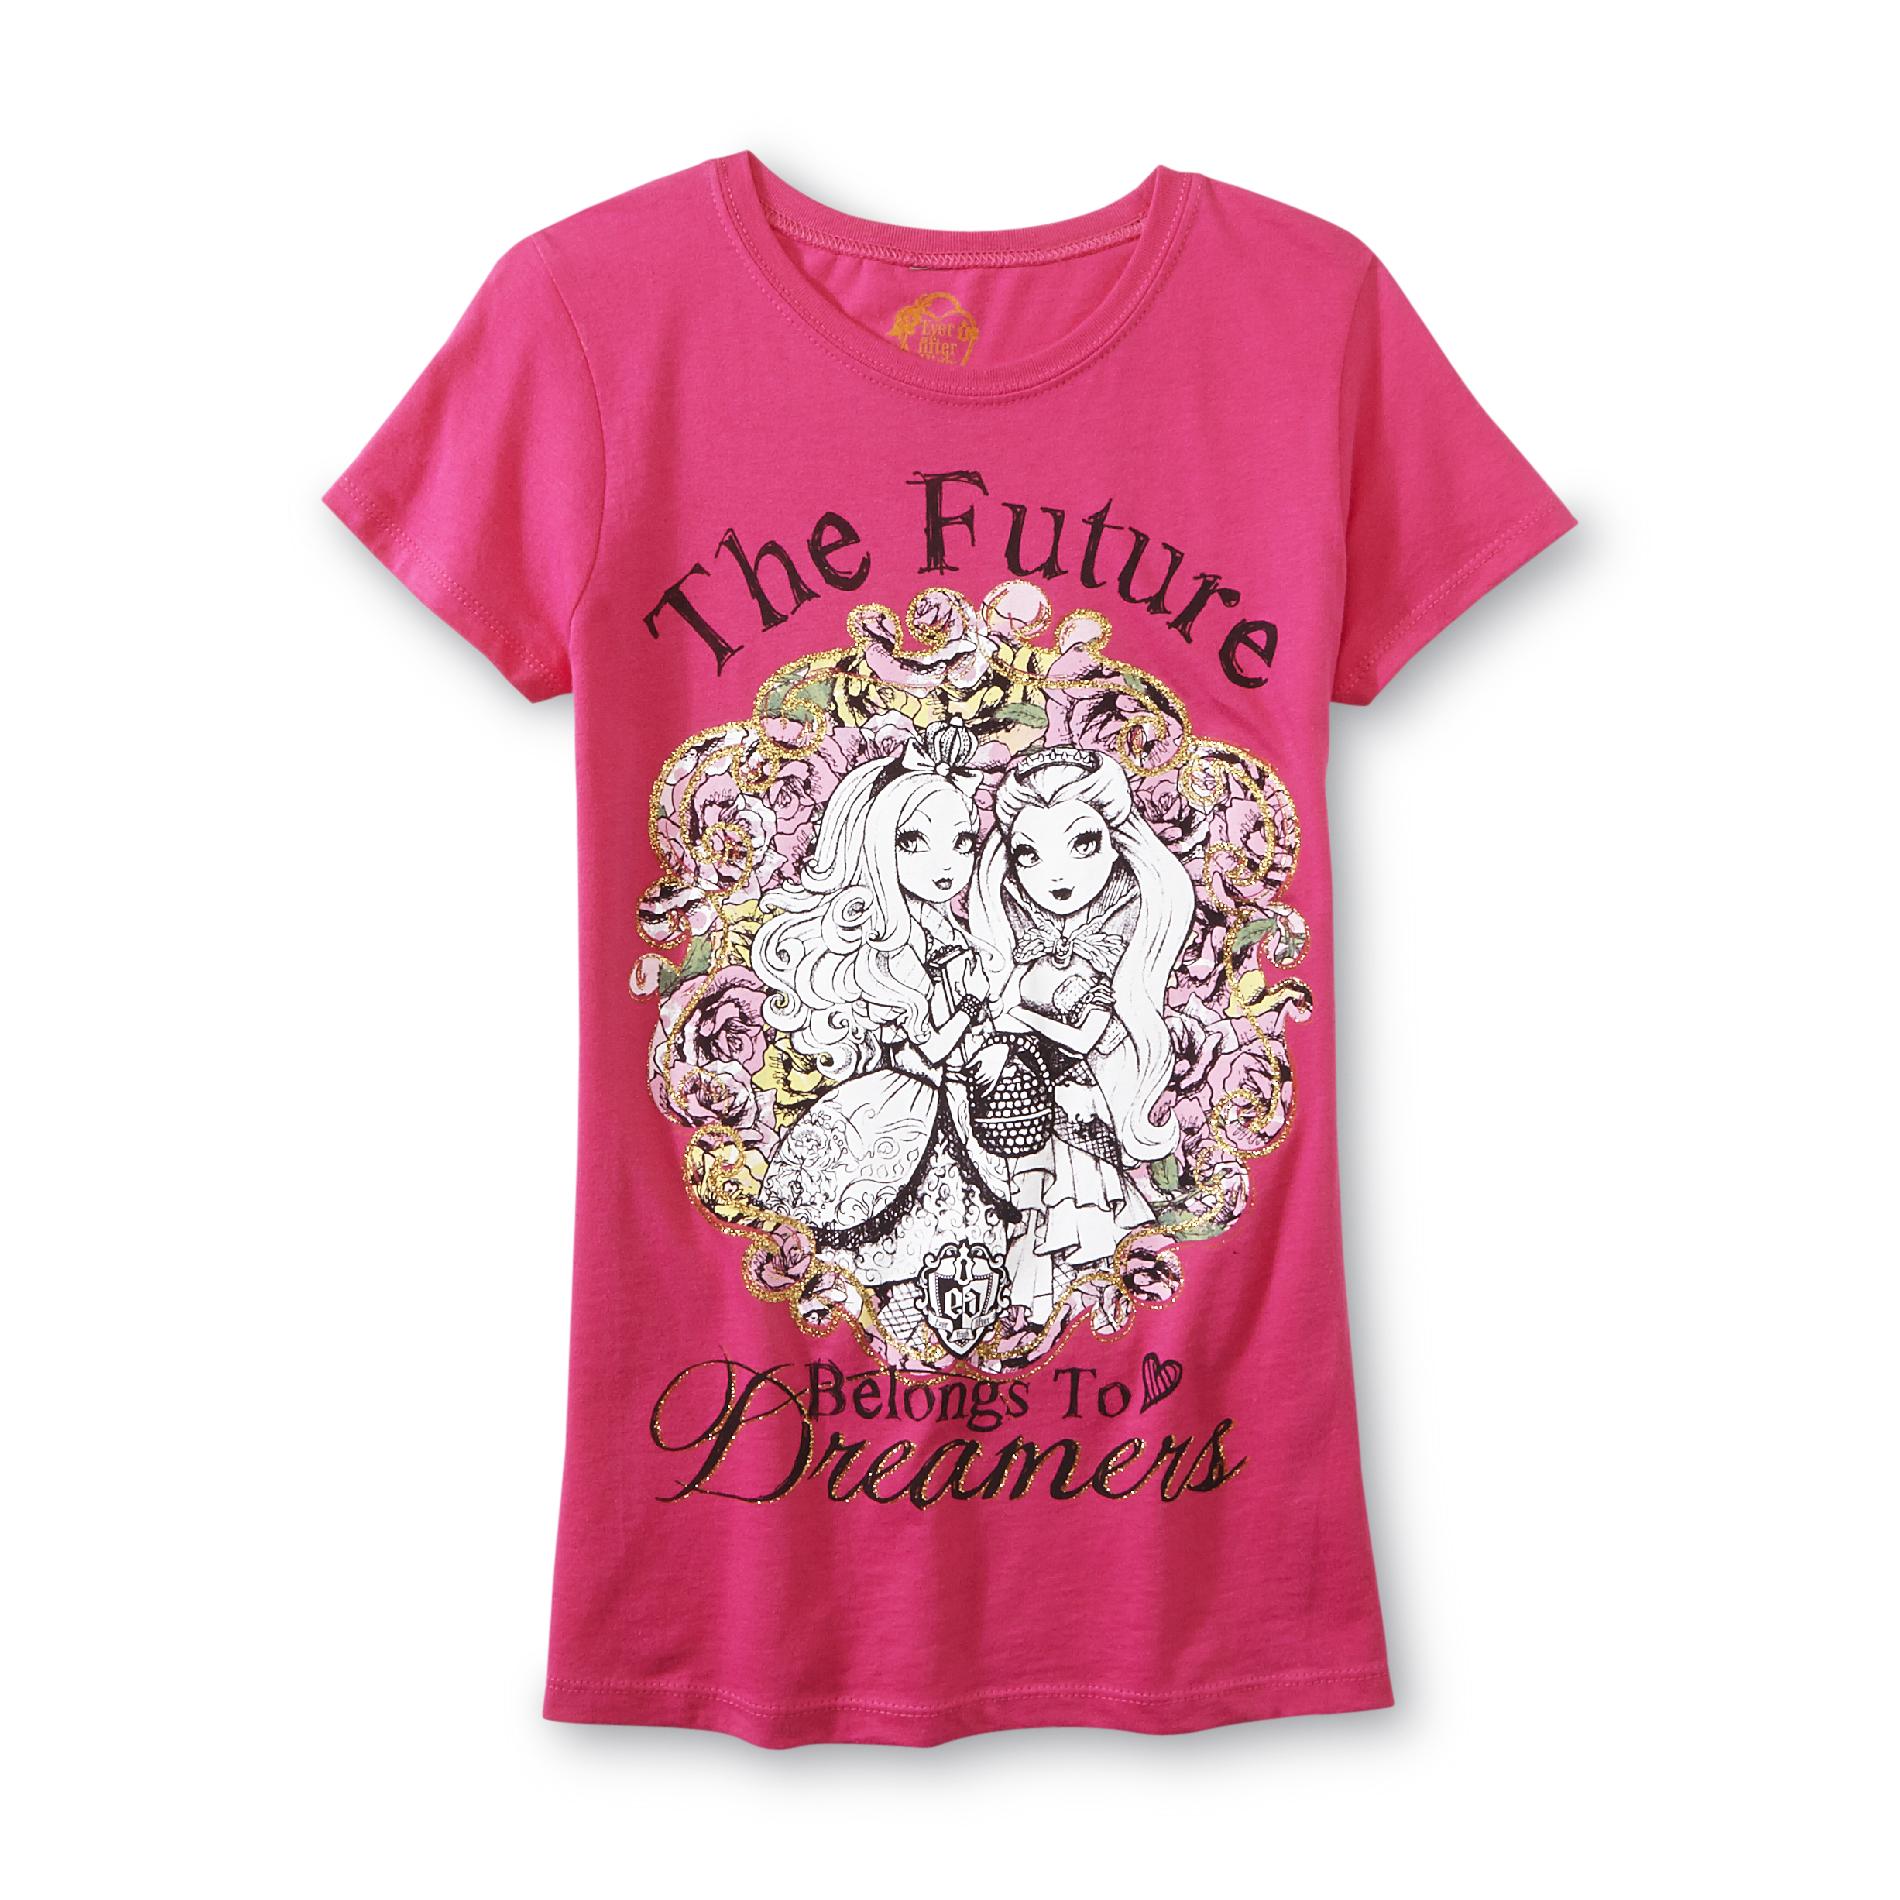 Ever After High Girl's T-Shirt - Dreamers